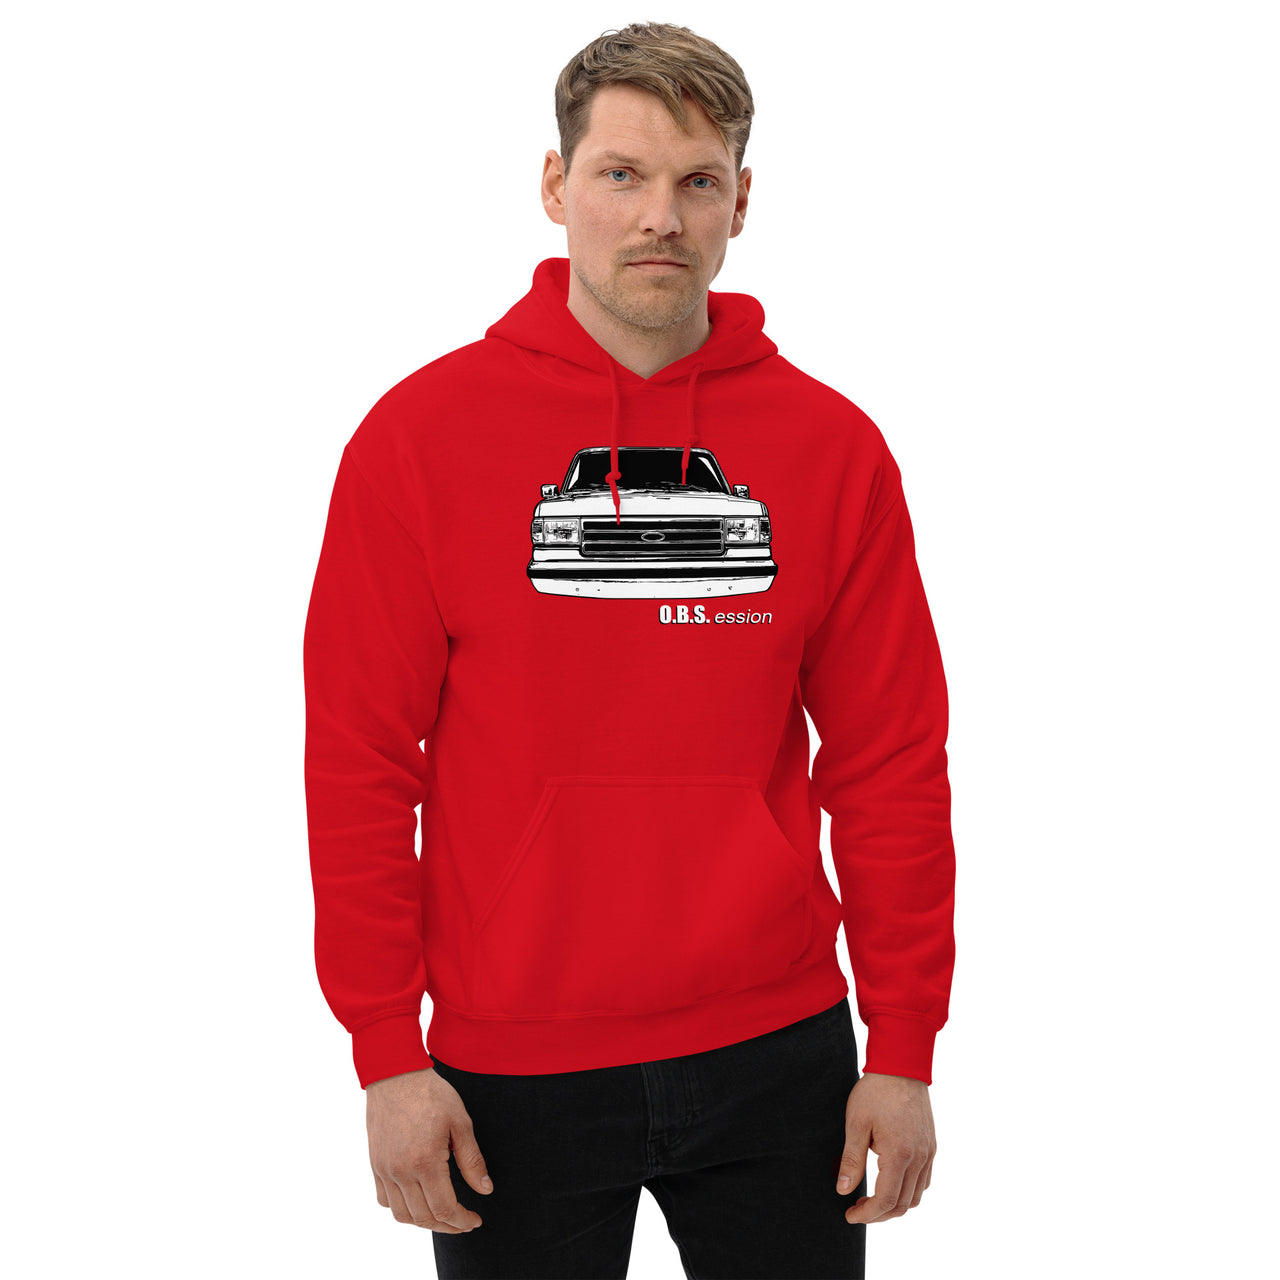 Brick Nose OBS Truck Hoodie modeled in red